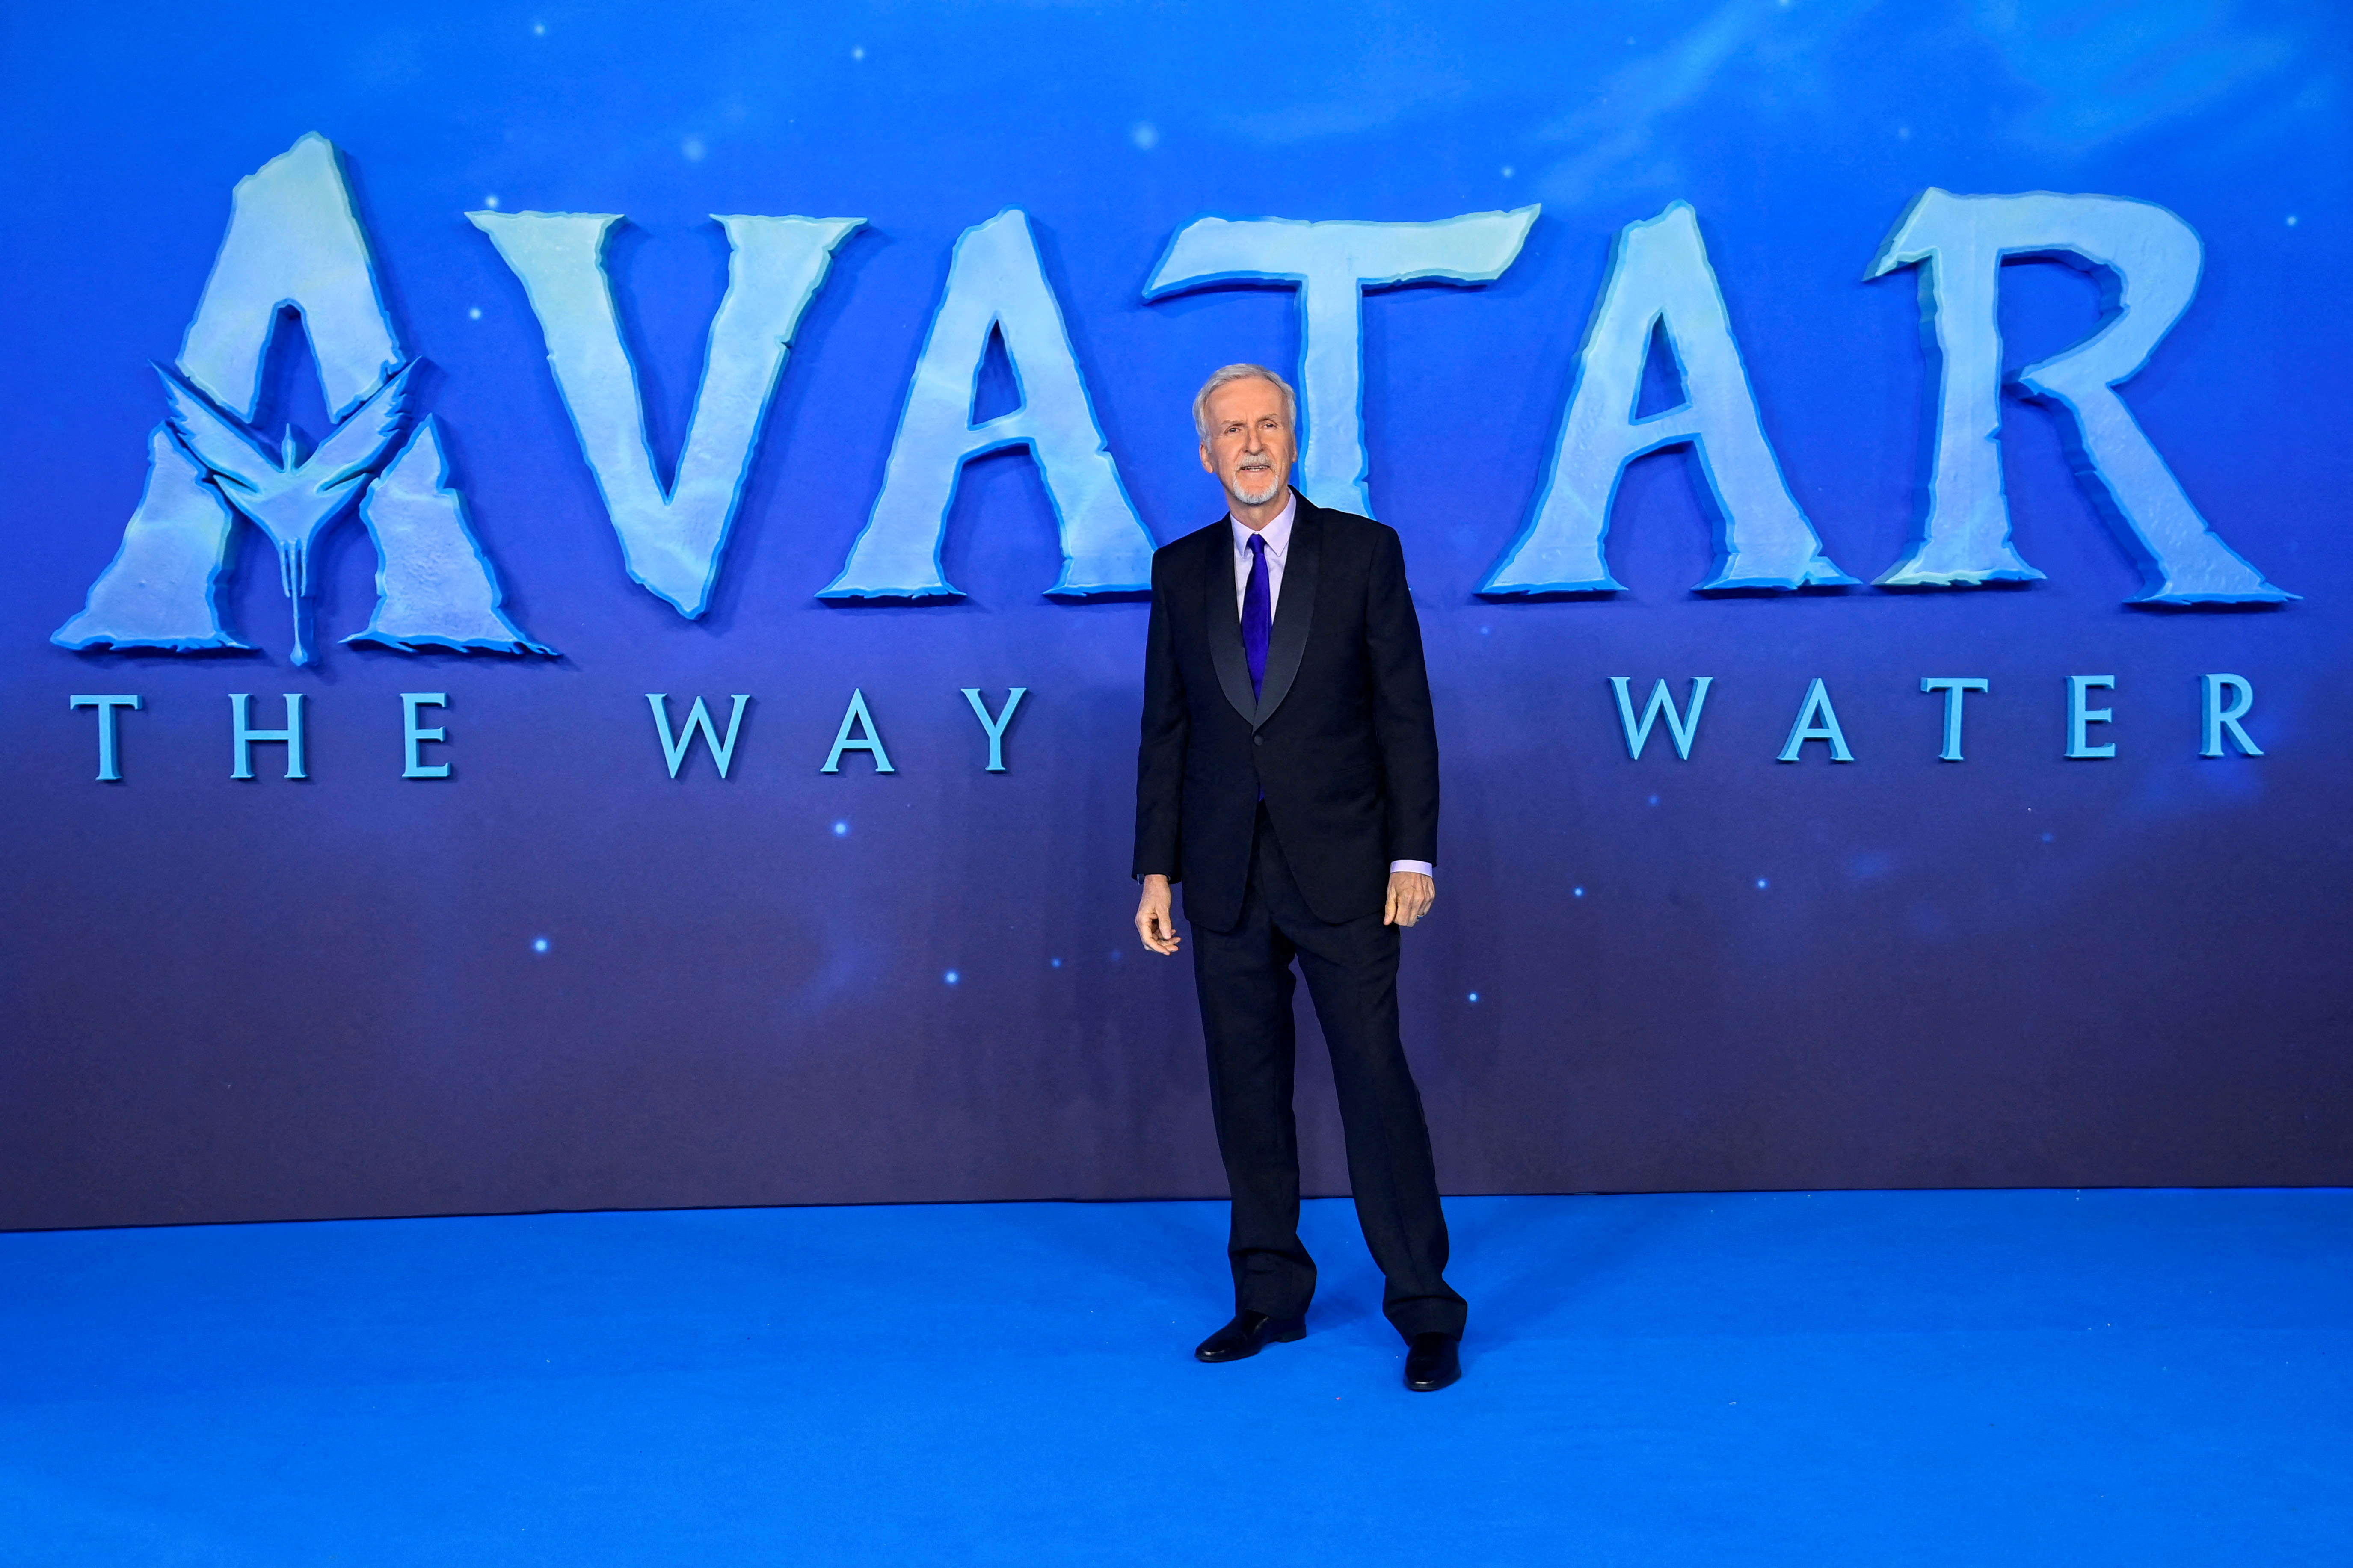 Avatar The Way of Water Box Office Collection